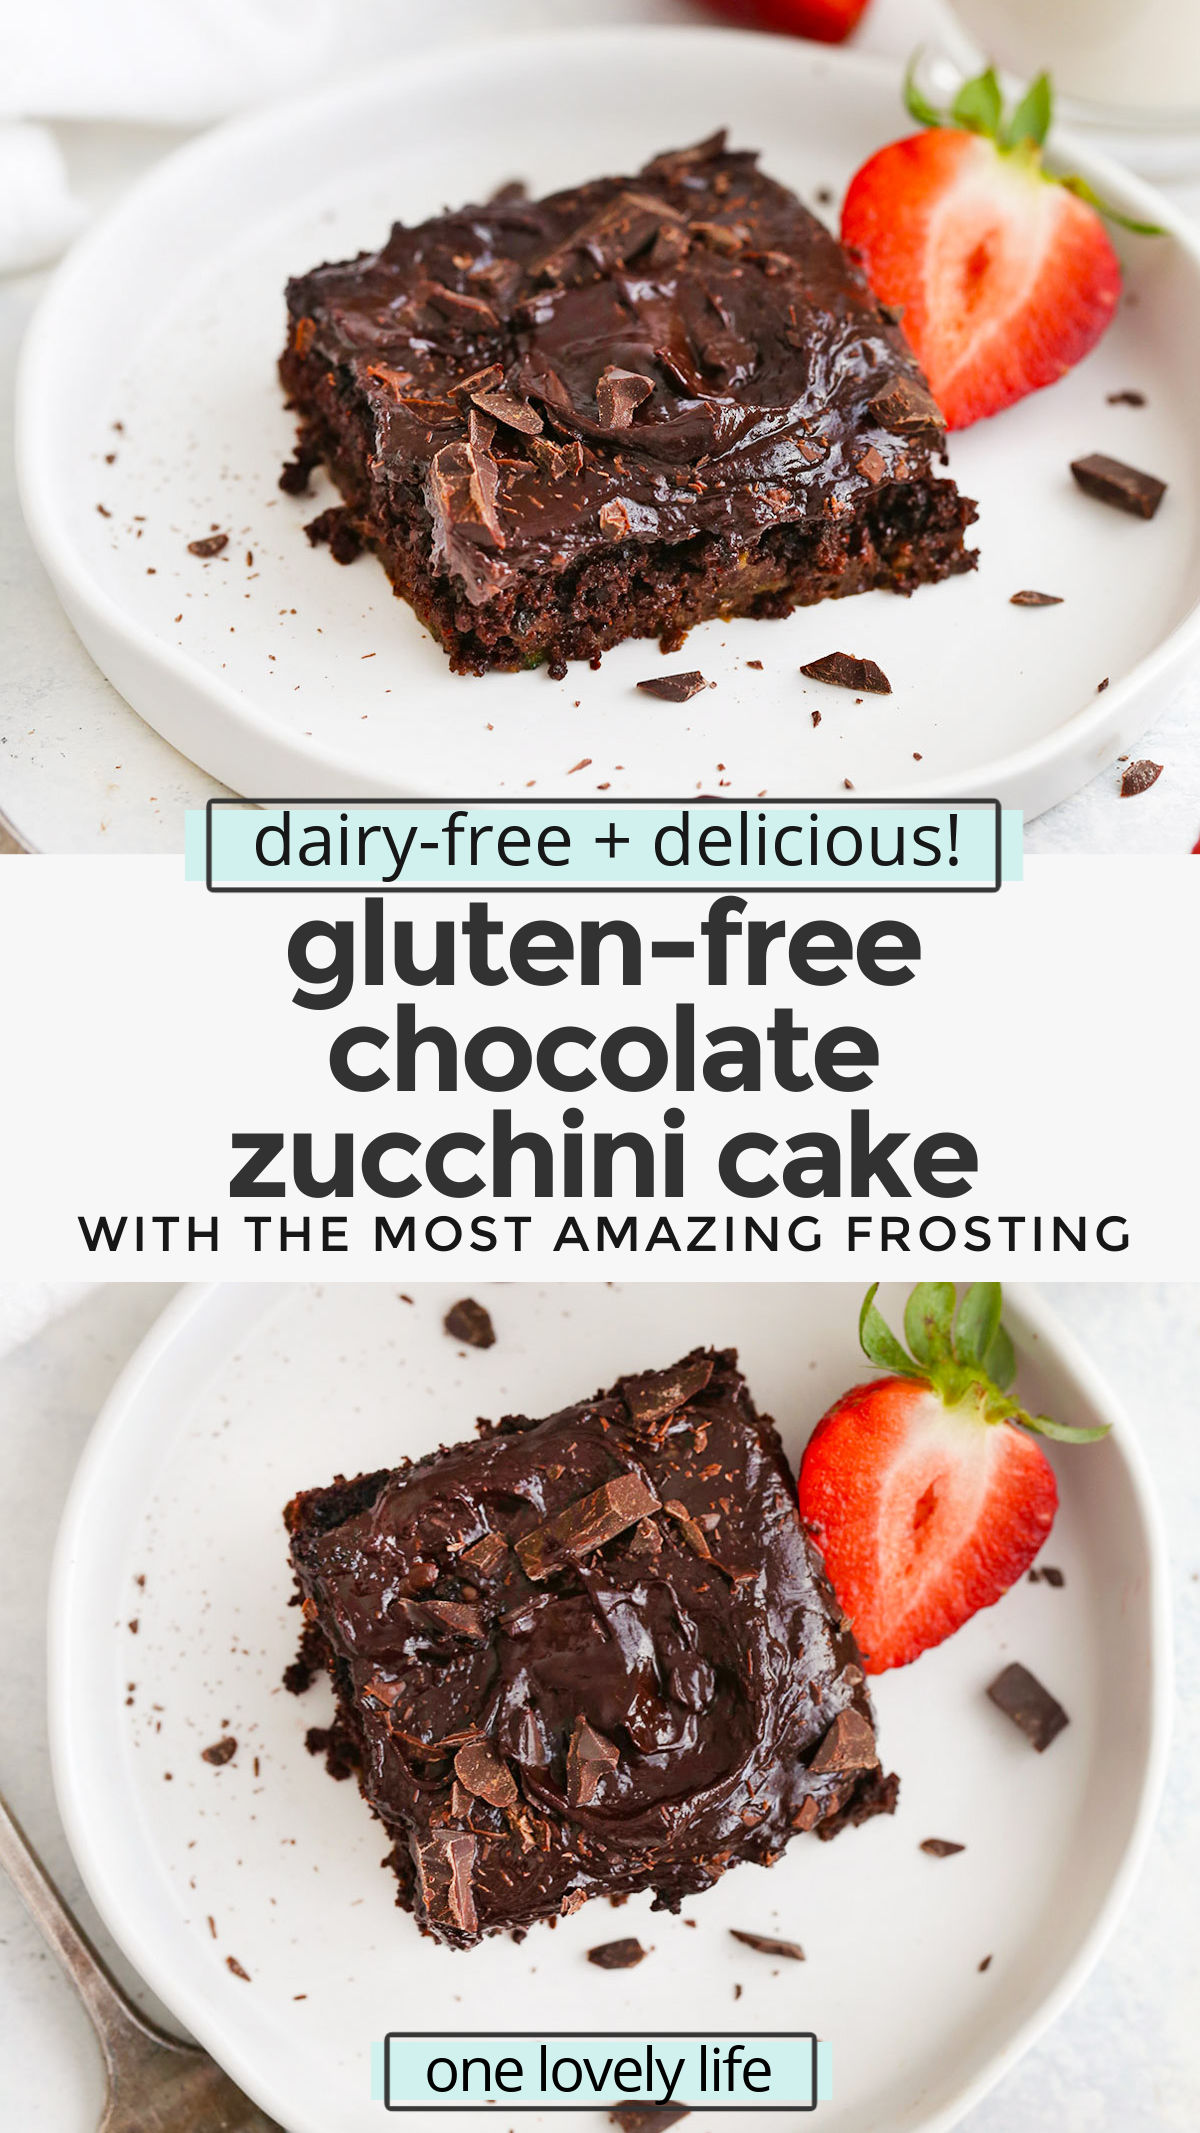 The BEST Gluten Free Chocolate Zucchini Cake. This gorgeous almond flour chocolate zucchini cake is packed with chocolate flavor. It's rich and decadent and 100% naturally sweetened! You'll love the paleo chocolate frosting! // gluten free cake recipe // gluten free chocolate cake recipe // dairy free chocolate cake recipe // almond flour cake // gluten free zucchini cake recipe #chocolate #zucchini #zucchinicake #chocolatecake #glutenfreecake #glutenfreechocolatecake #paleocake #almondflourcake